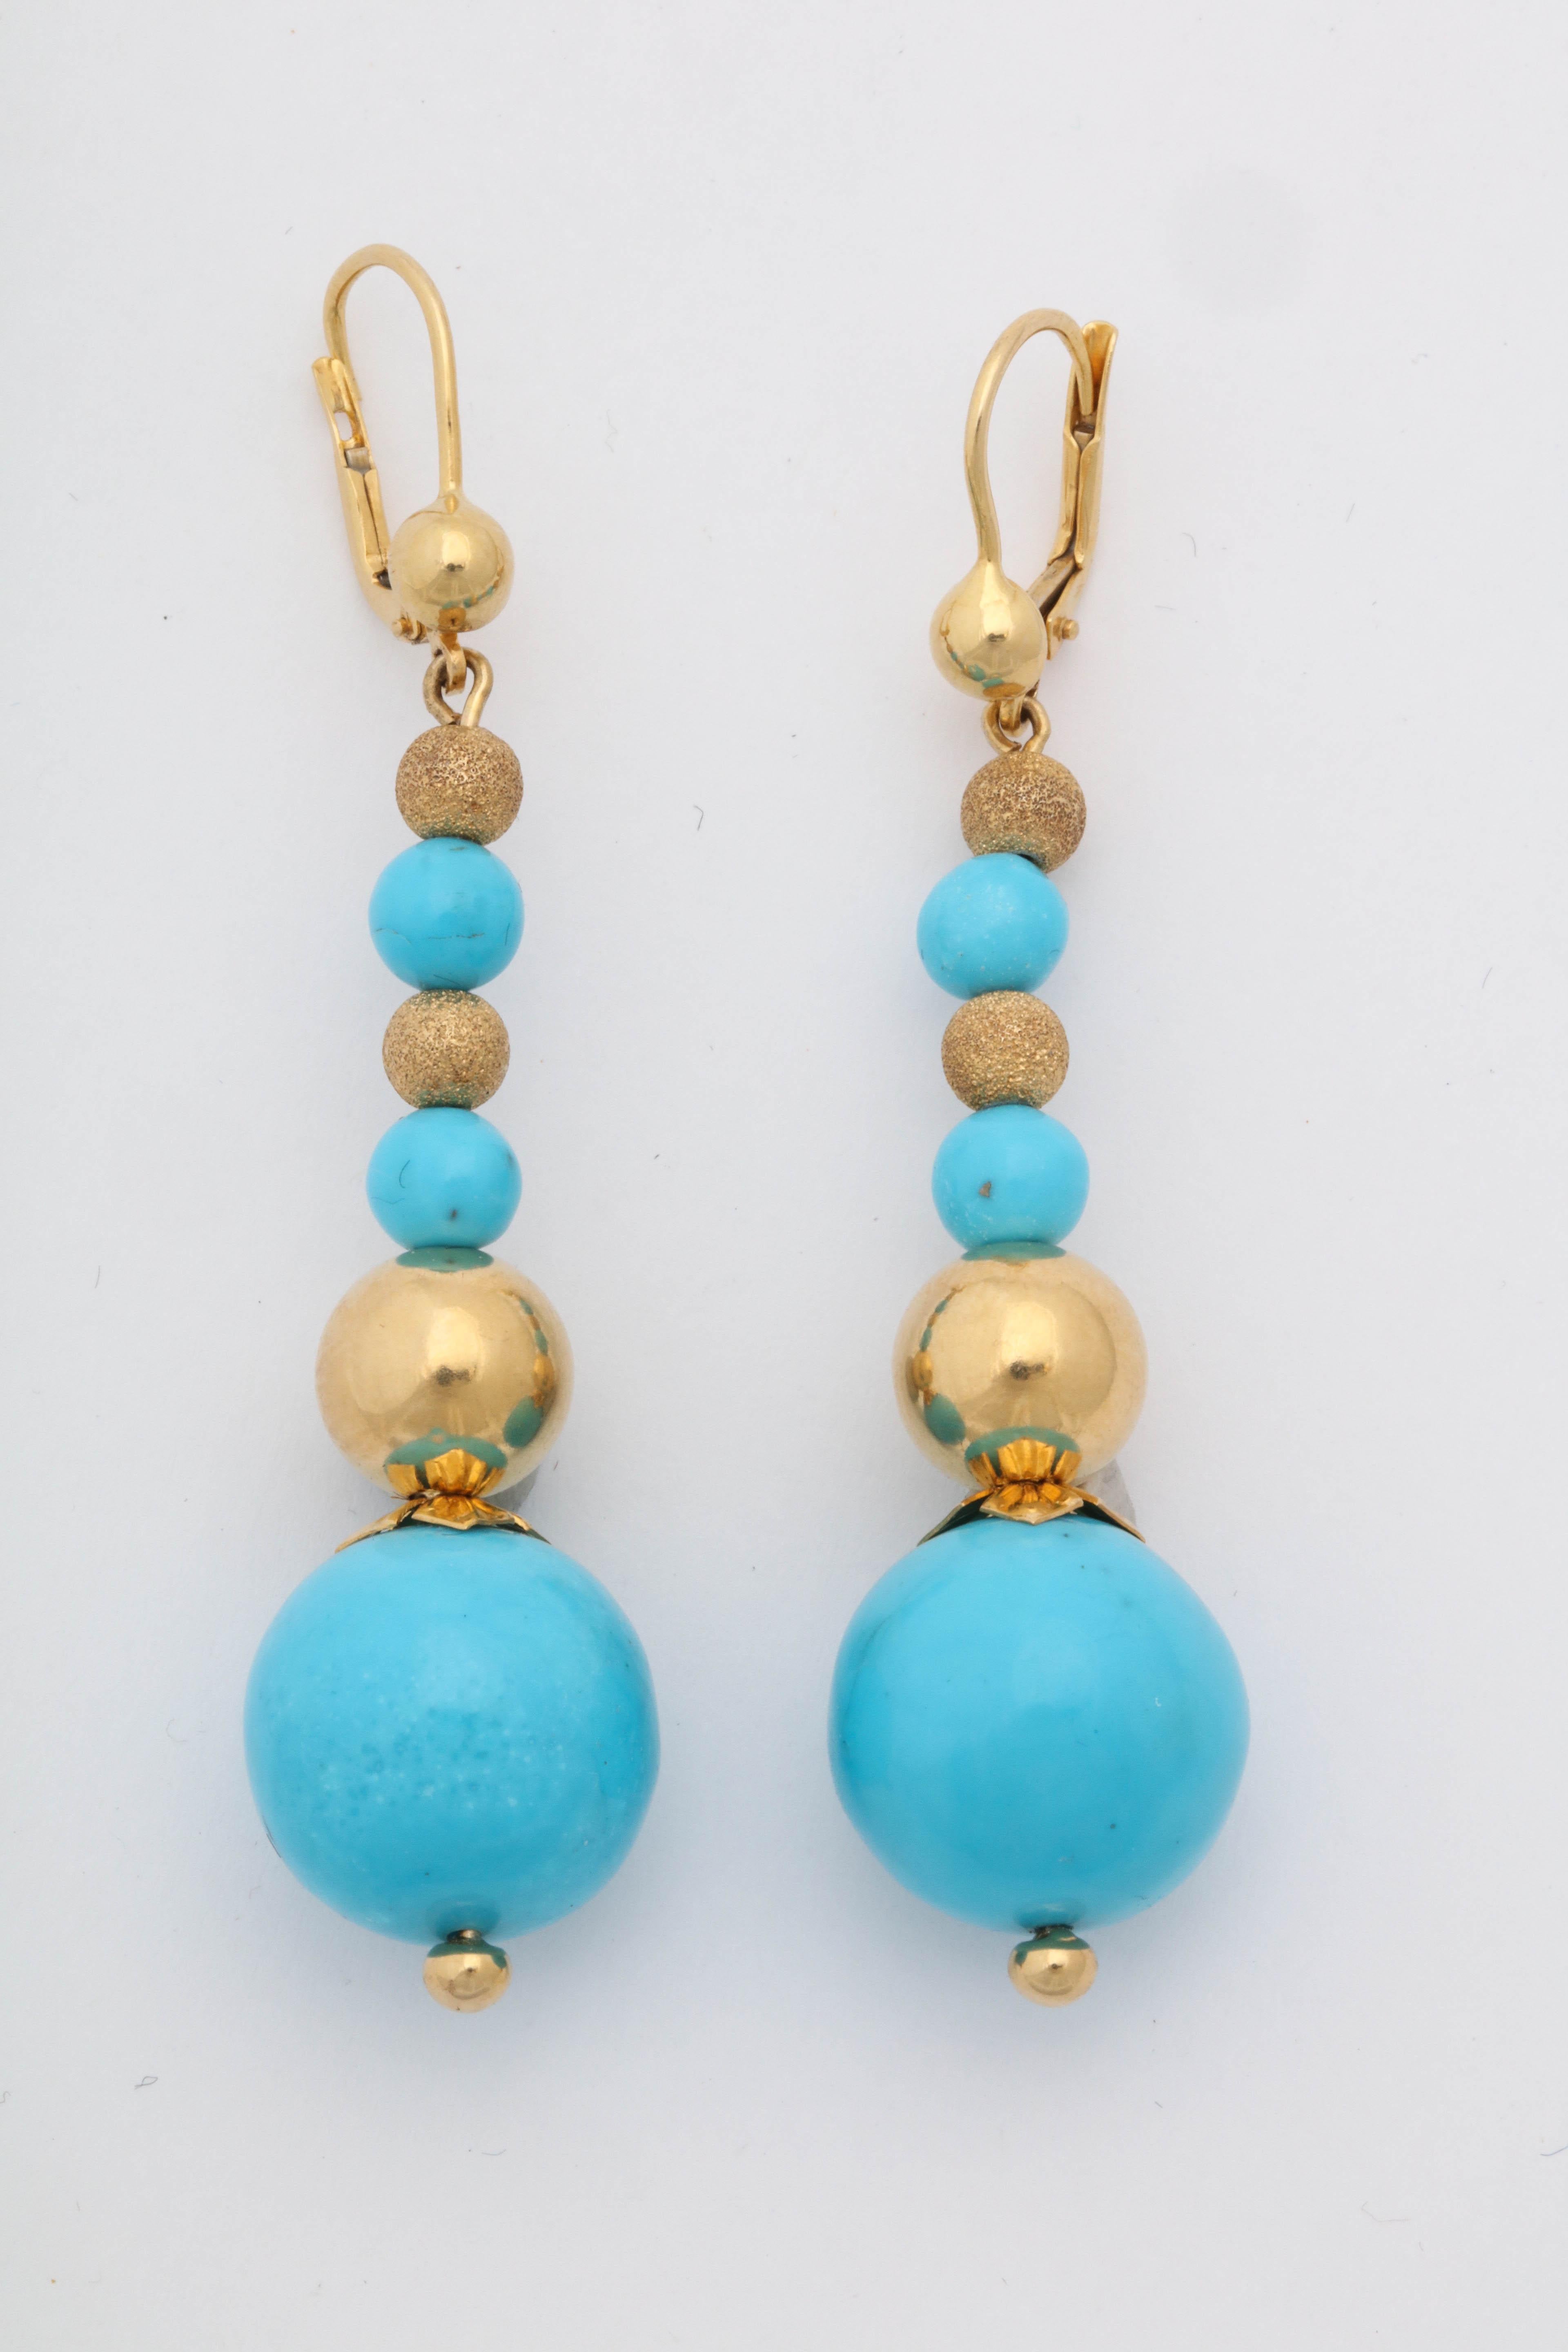 1980s Italian Turquoise Ball with Sparkly and High Polish Ball Earrings In Good Condition For Sale In New York, NY